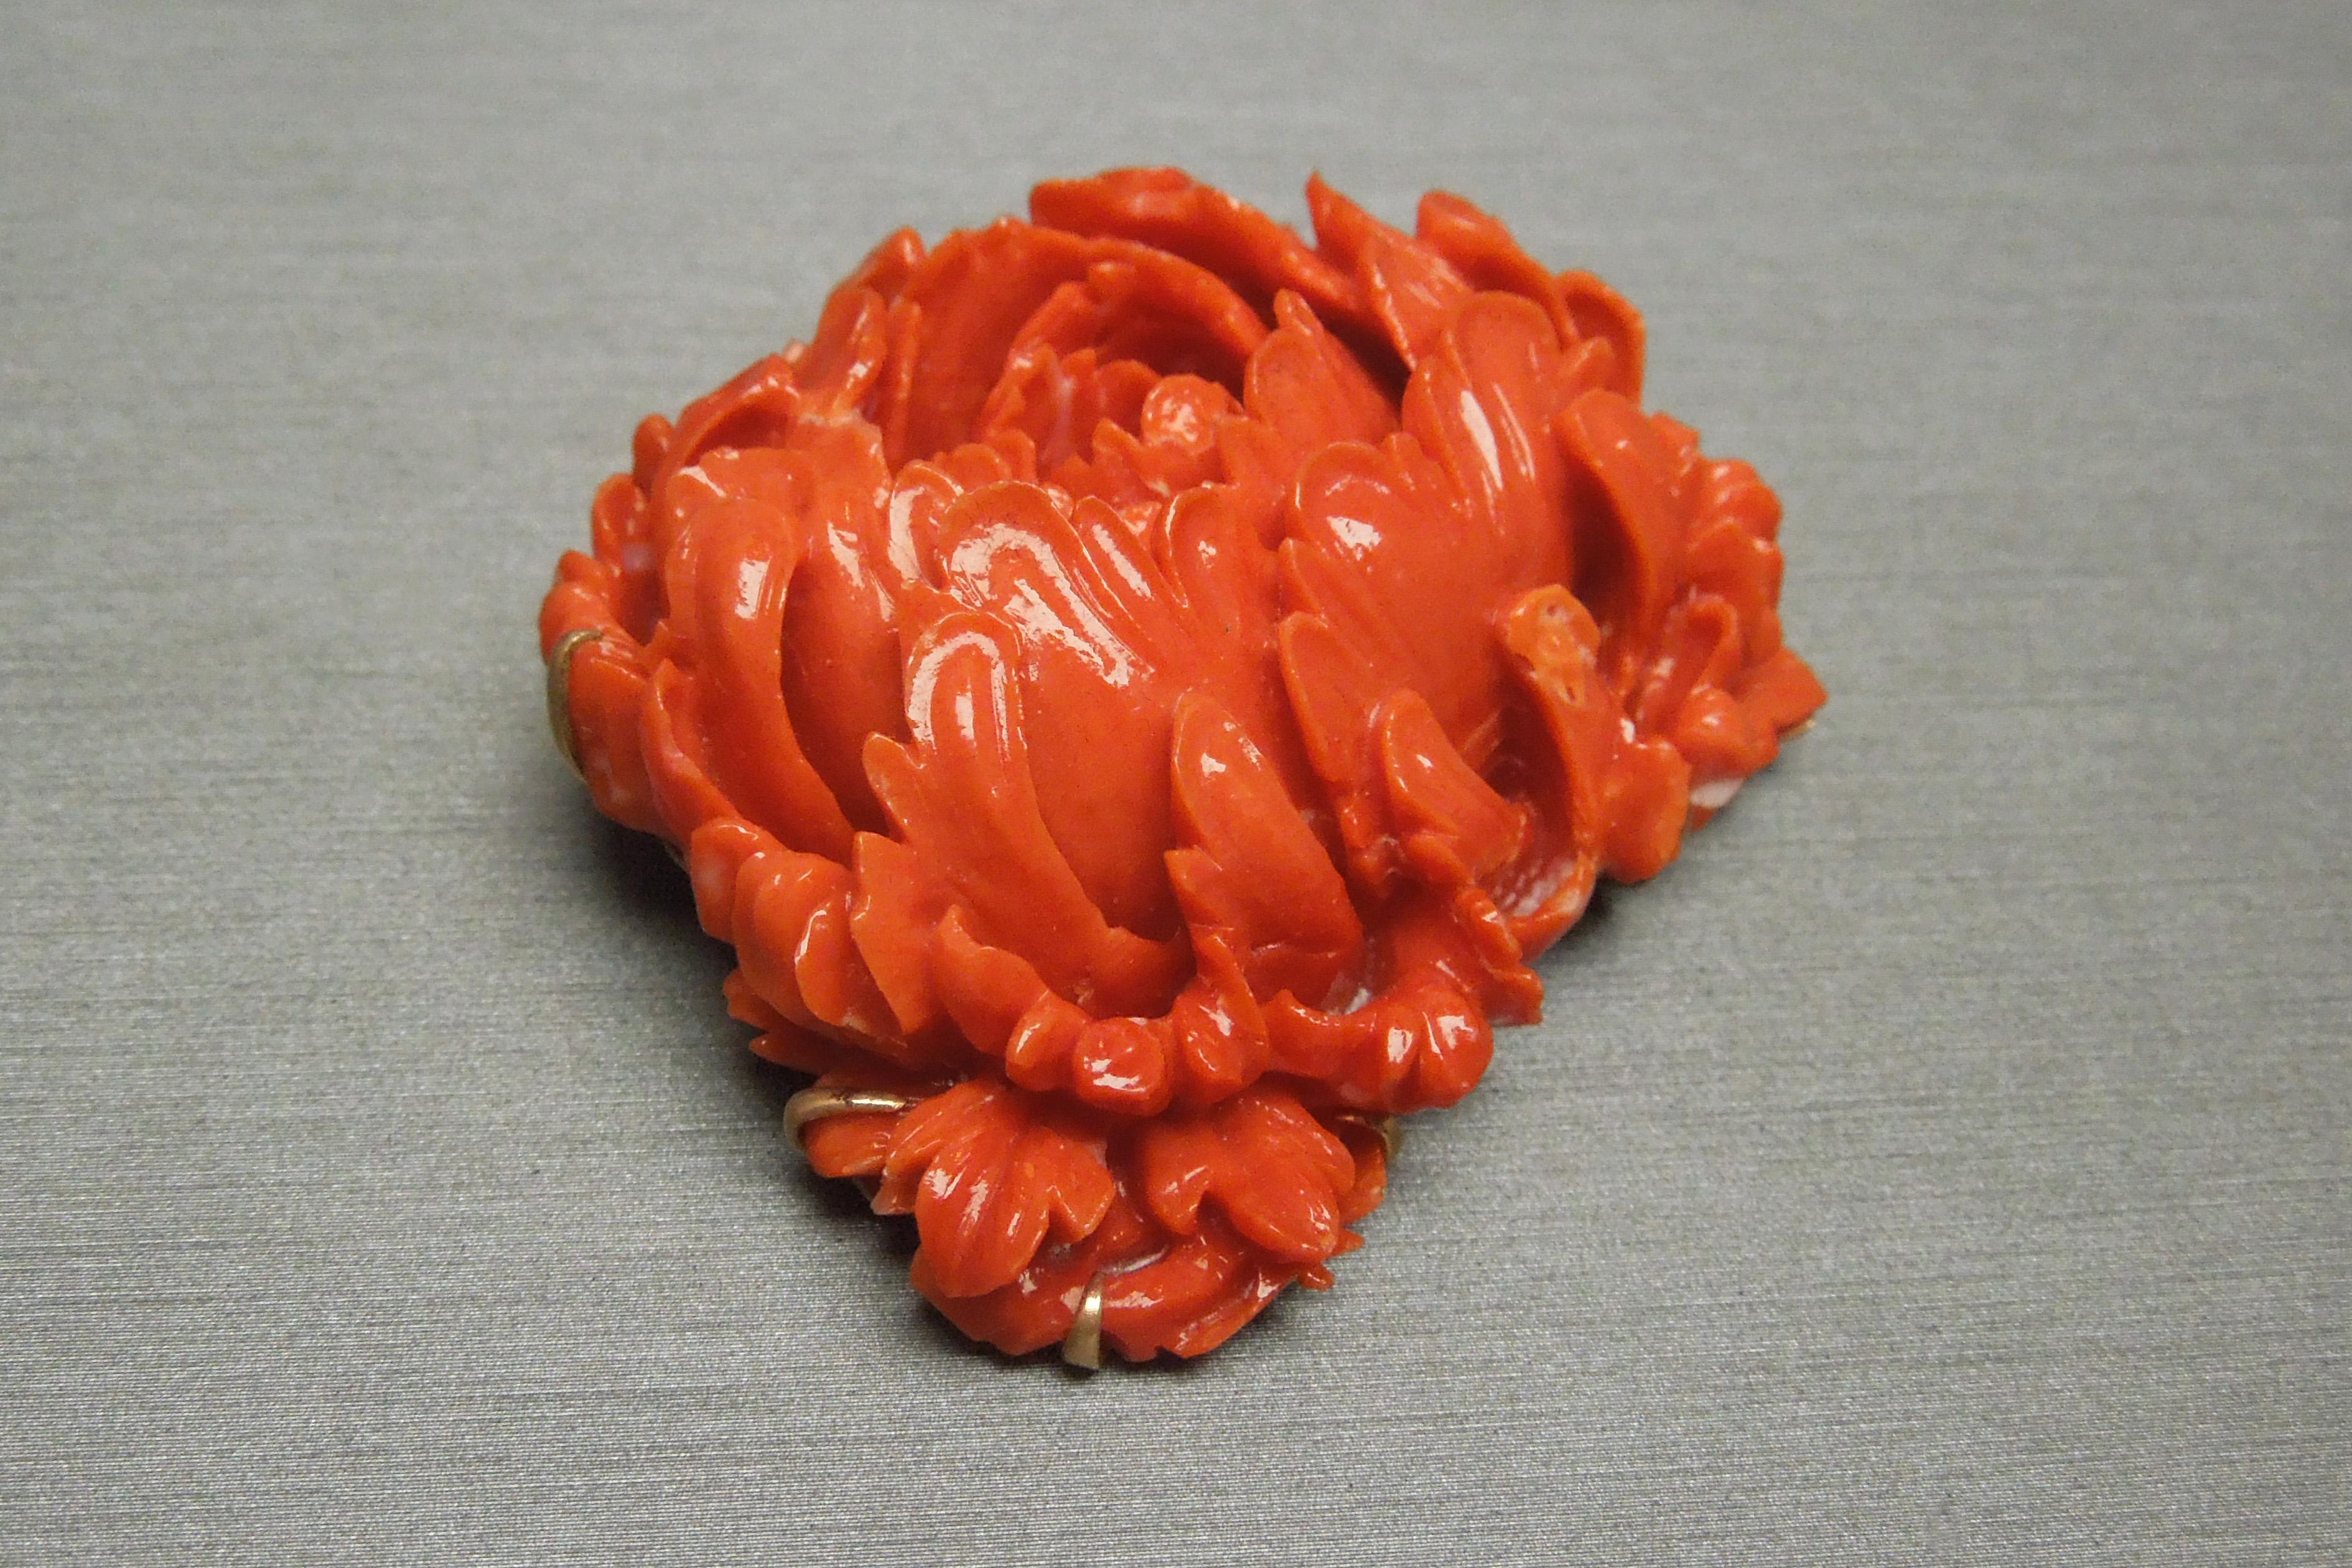 This period Victorian brooch features a single Natural Ox Blood Red Coral intricately Hand Carved into a Chrysanthemum flower weighing in at 205.00 carats, secured in a 9-prong electronically tested 10KT Gold frame with complementary pierced out